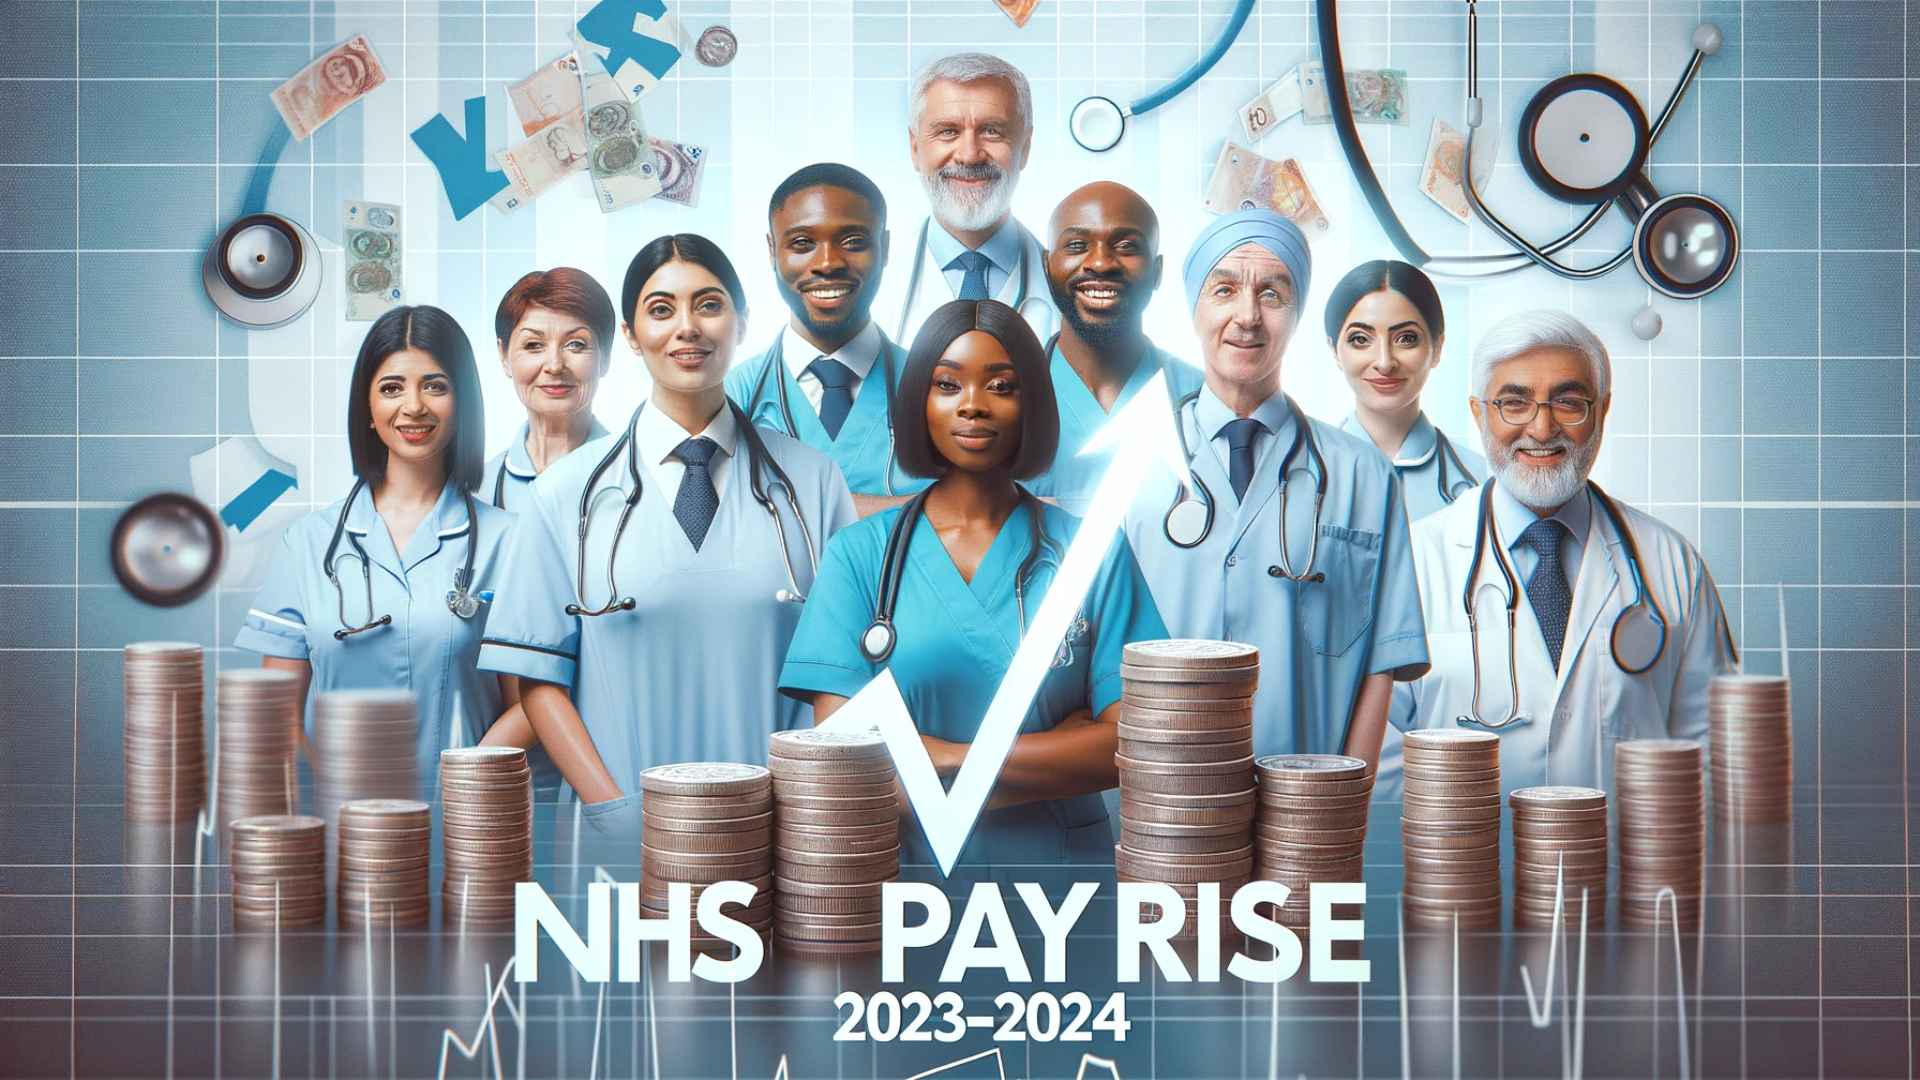 NHS Pay Rise 20232024 When Will NHS Pay Rise Be Paid in 2023 and 2024?